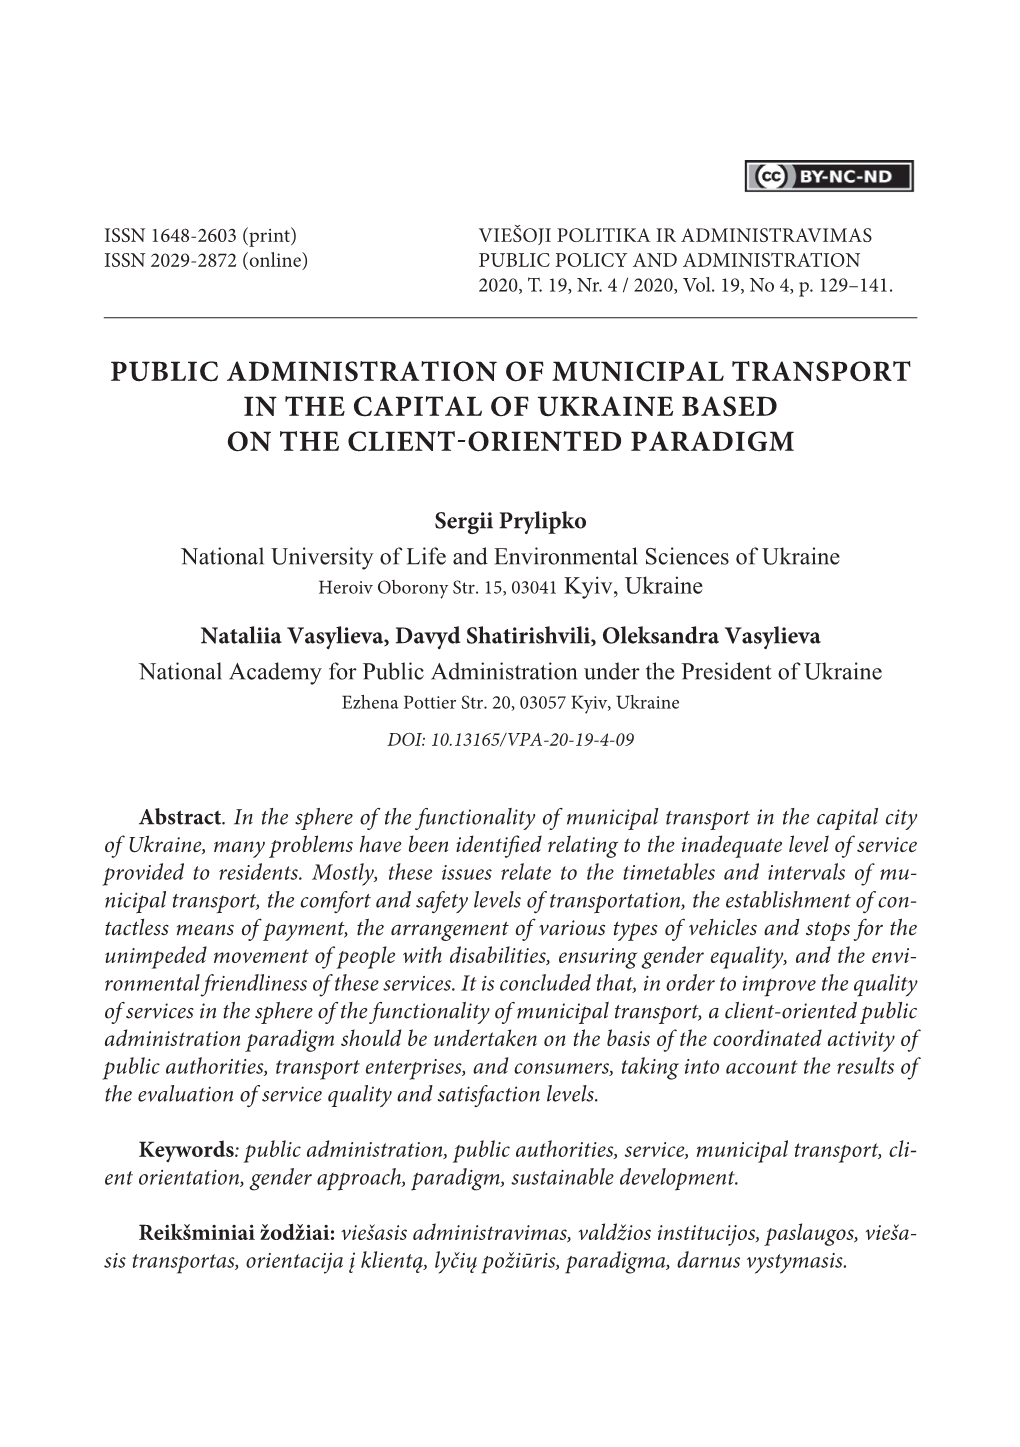 Public Administration of Municipal Transport in the Capital of Ukraine Based on the Client-Oriented Paradigm